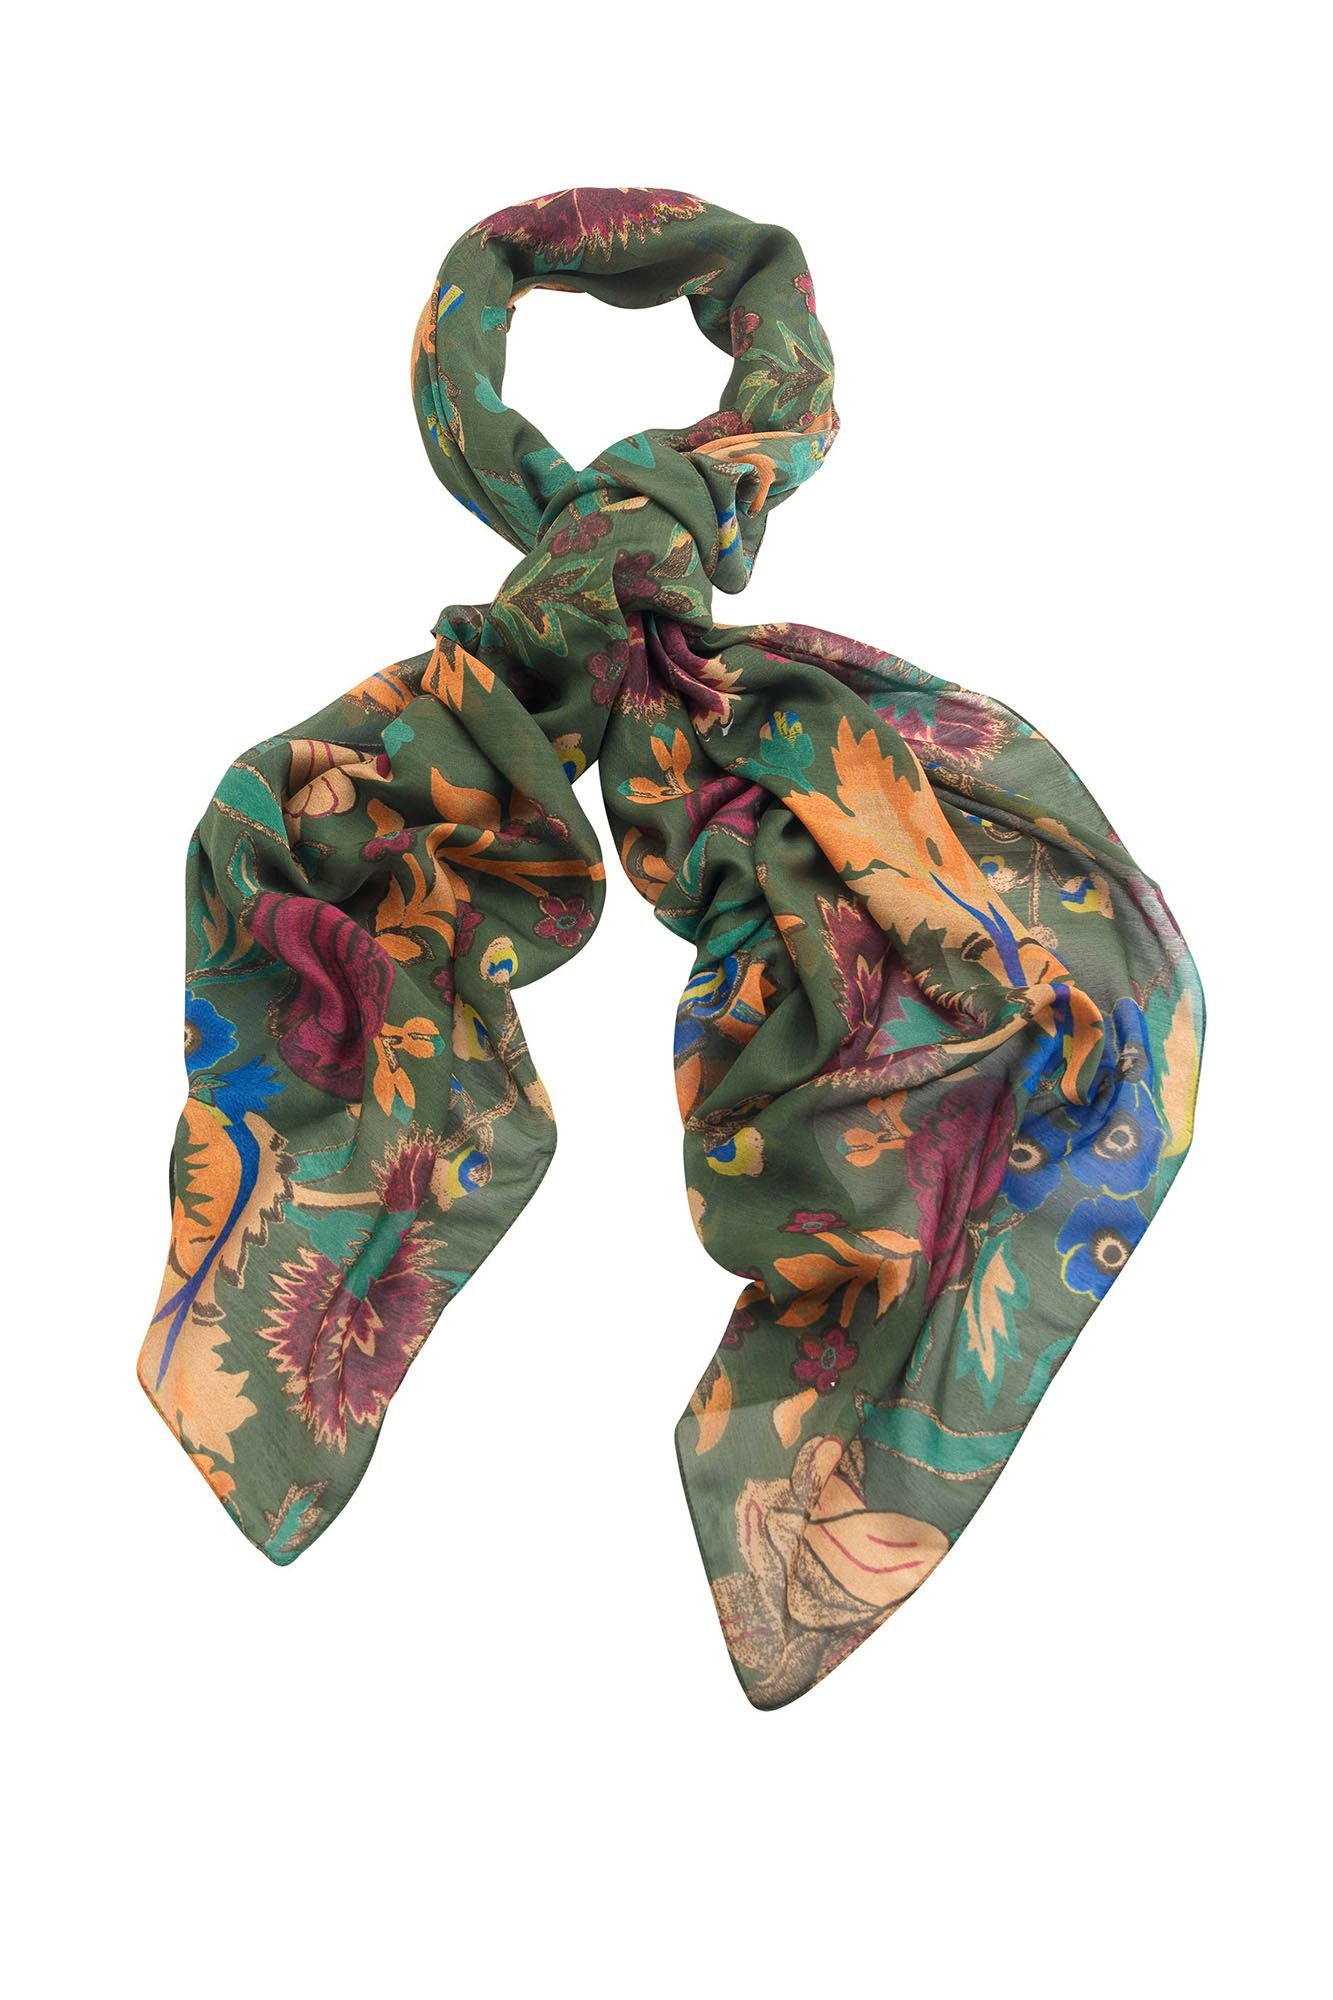 A scarf by One Hundred Stars from Vinegar Hill in an illustrative floral print against a  mid green background. The flowers and leaves are printed in shades  of gold, blue and purple